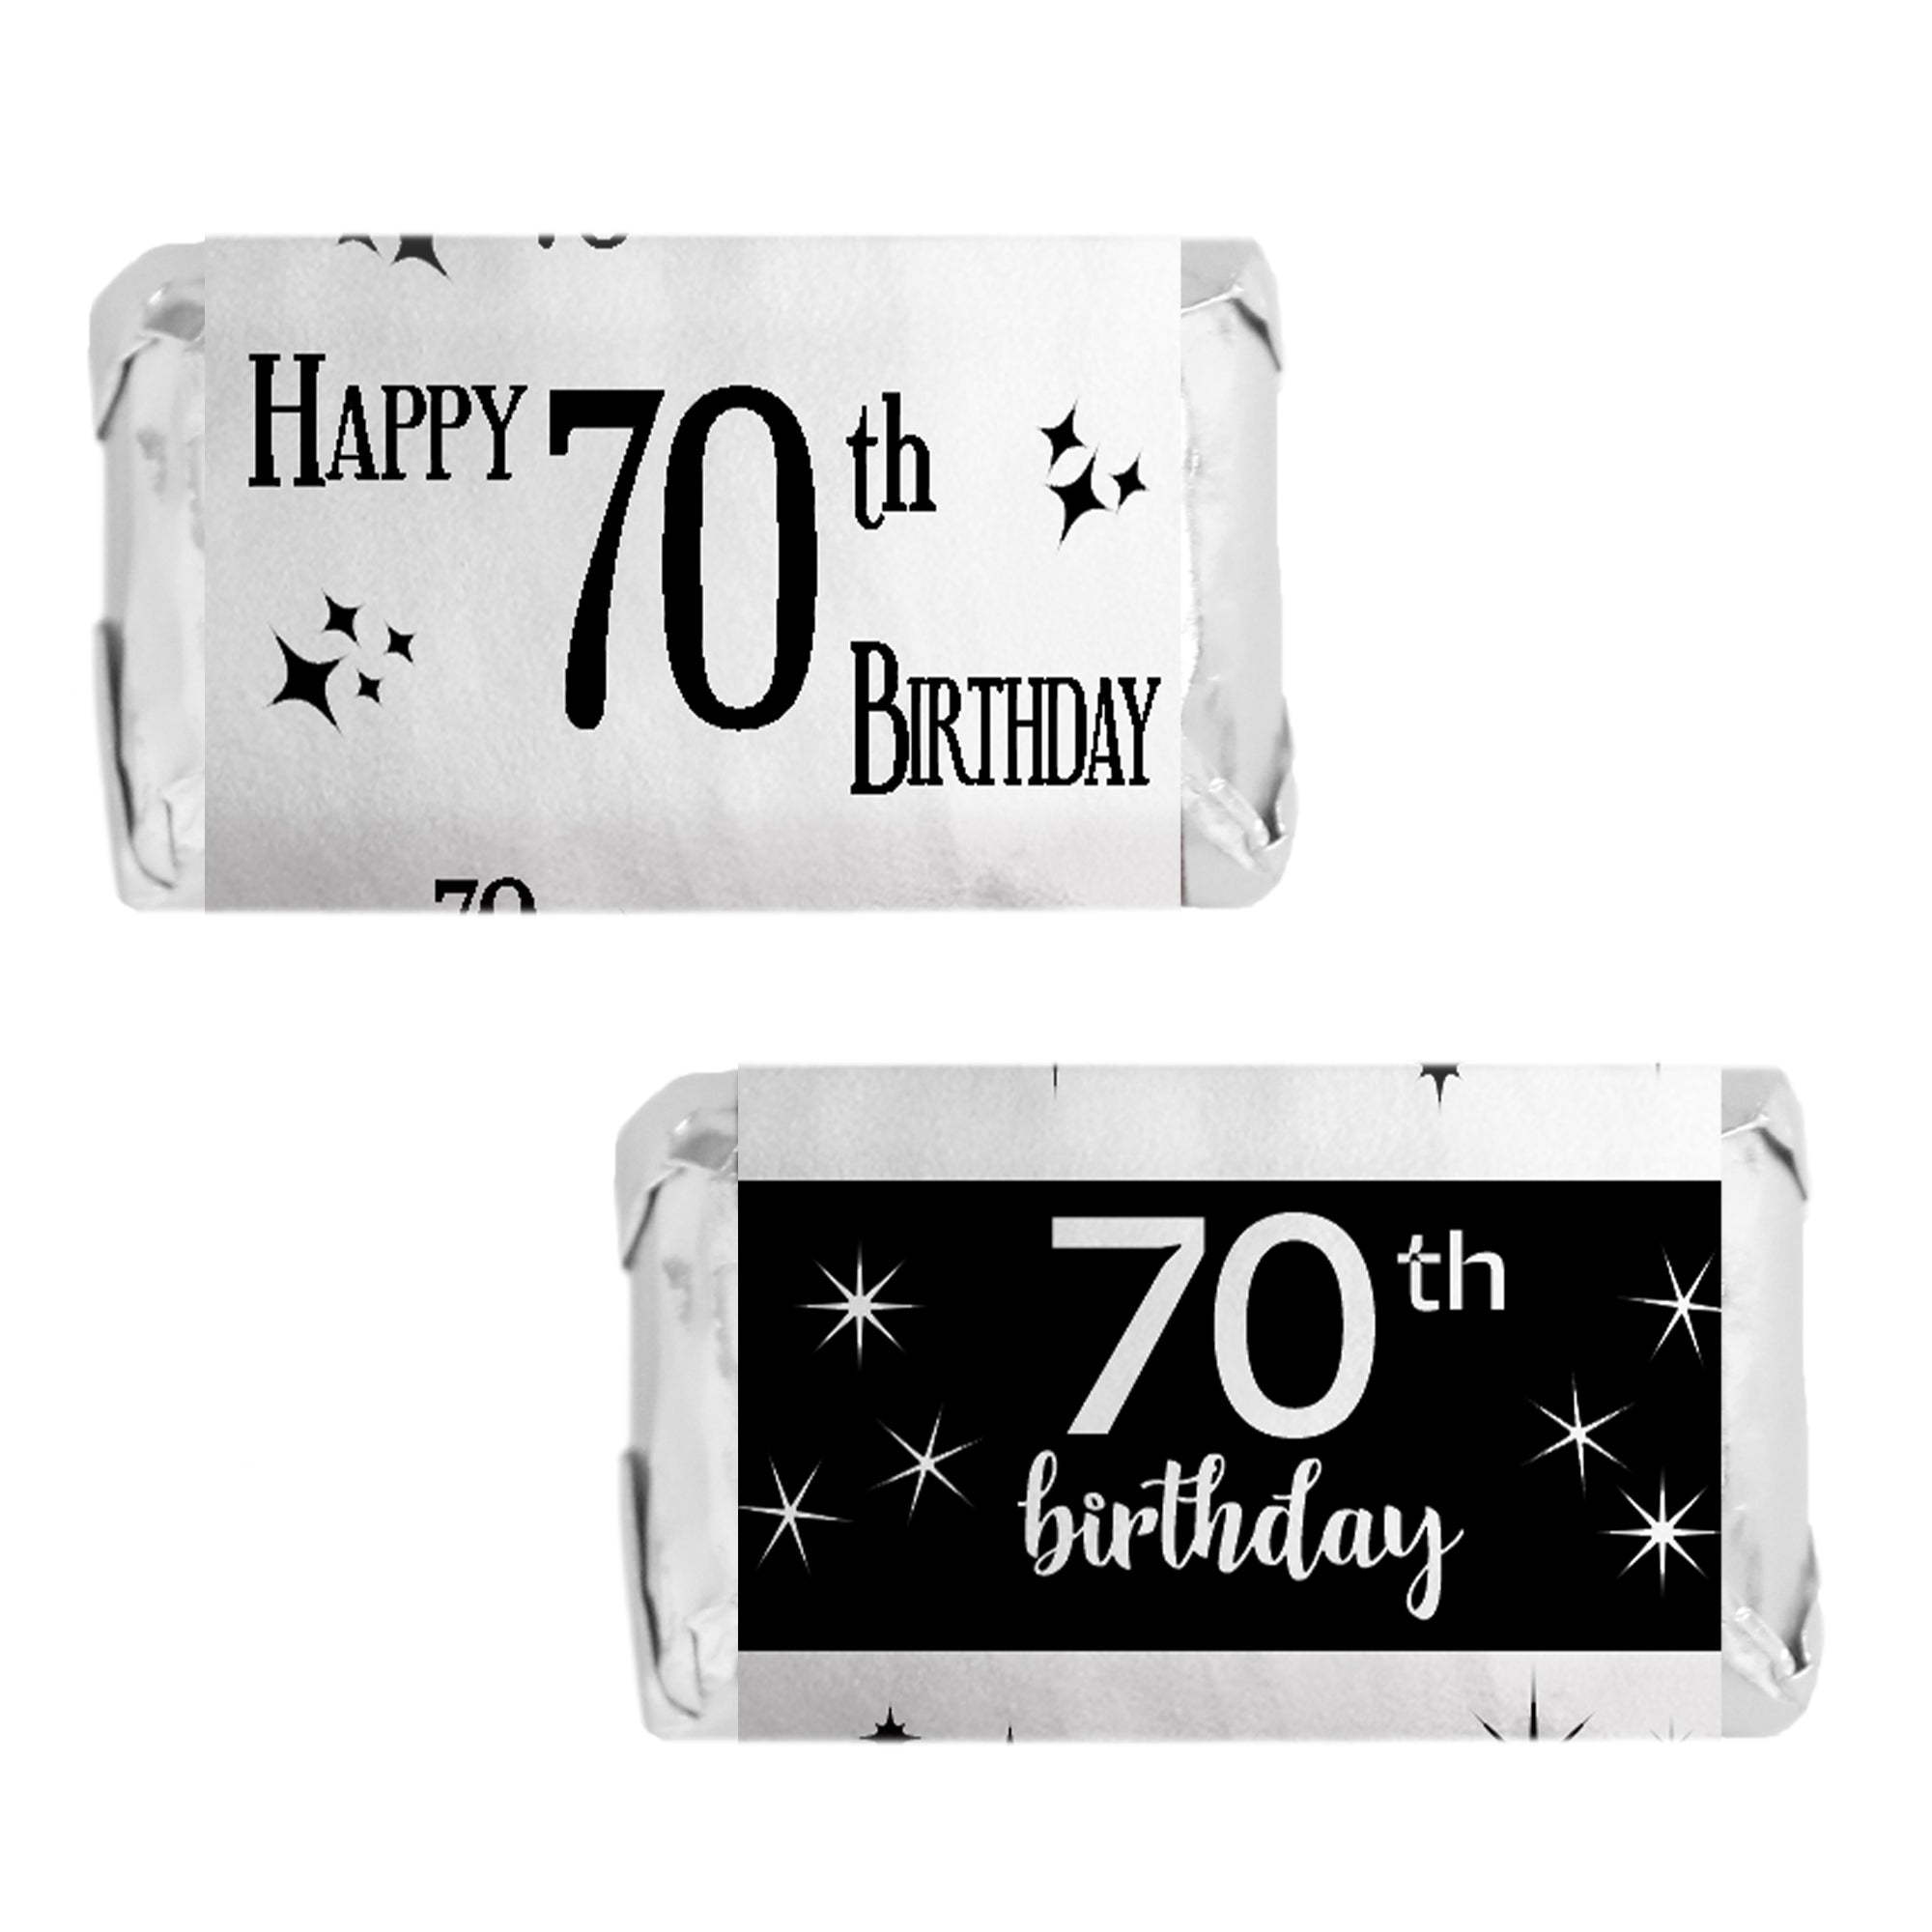 Add sparkle to a loved one's 70th birthday with these Black and Silver Shiny Foil Mini Candy Bar Stickers.